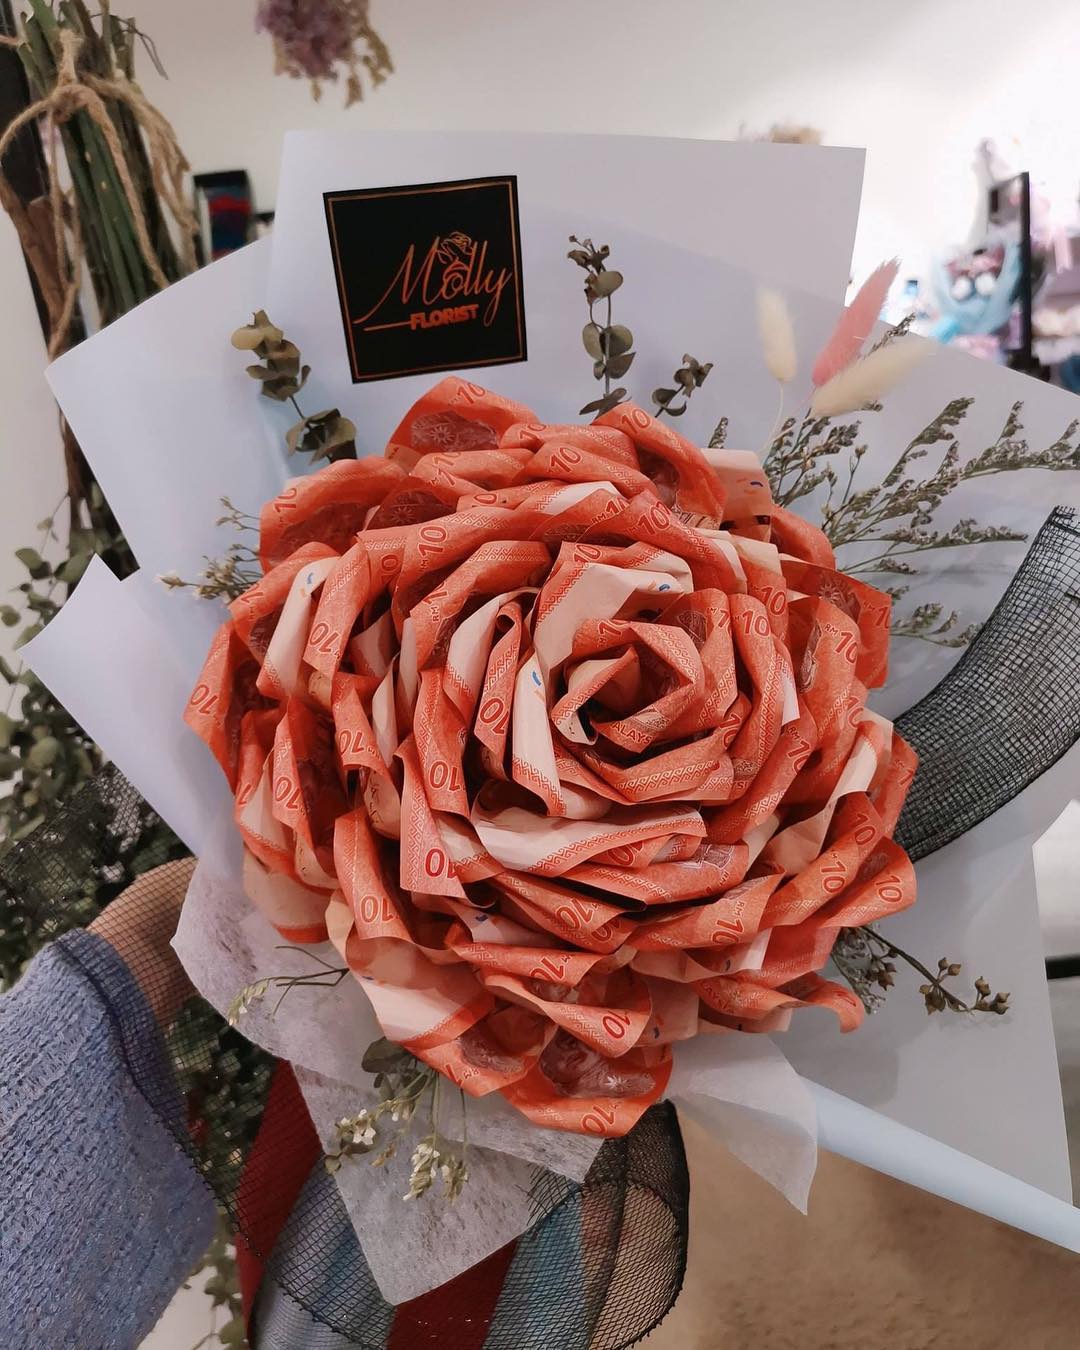 X Unique Bouquets You Can Get In KL This Valentines Day - WORLD OF BUZZ 7